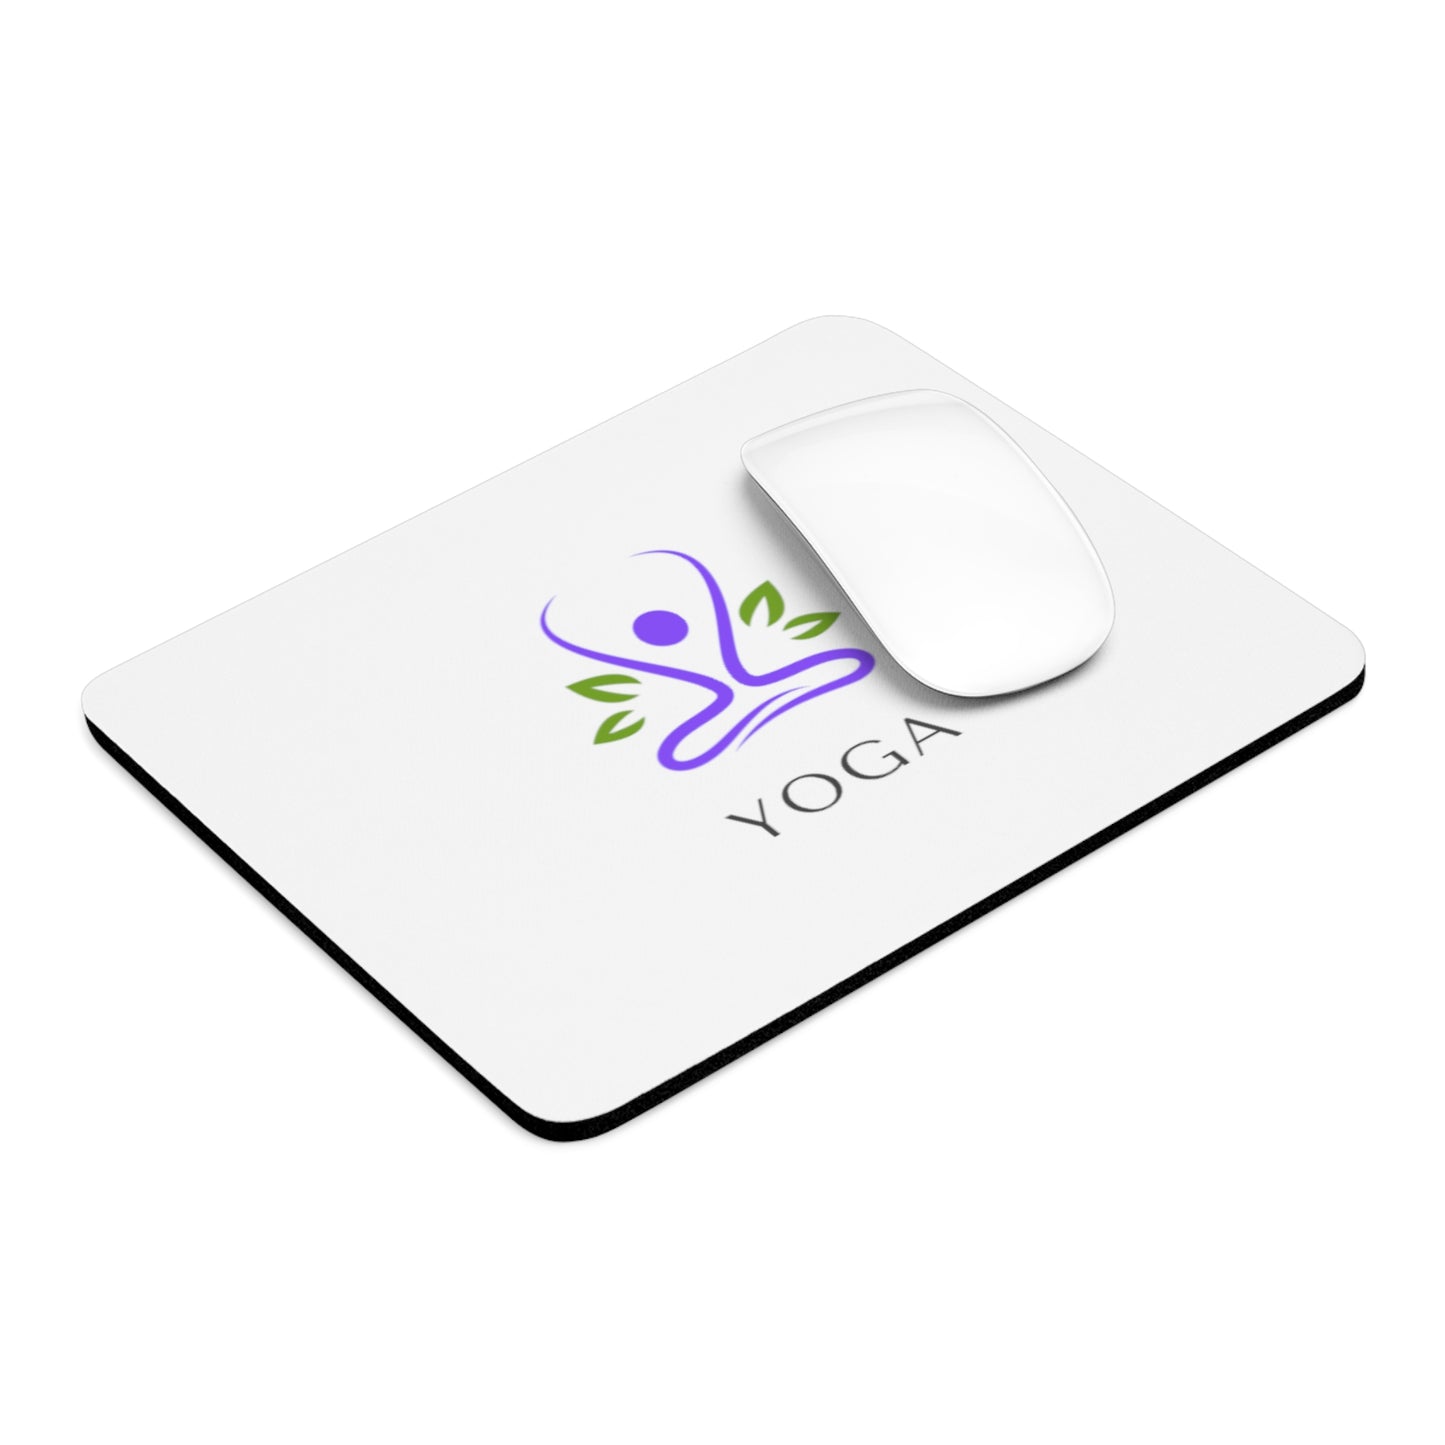 YOGA Mouse Pads